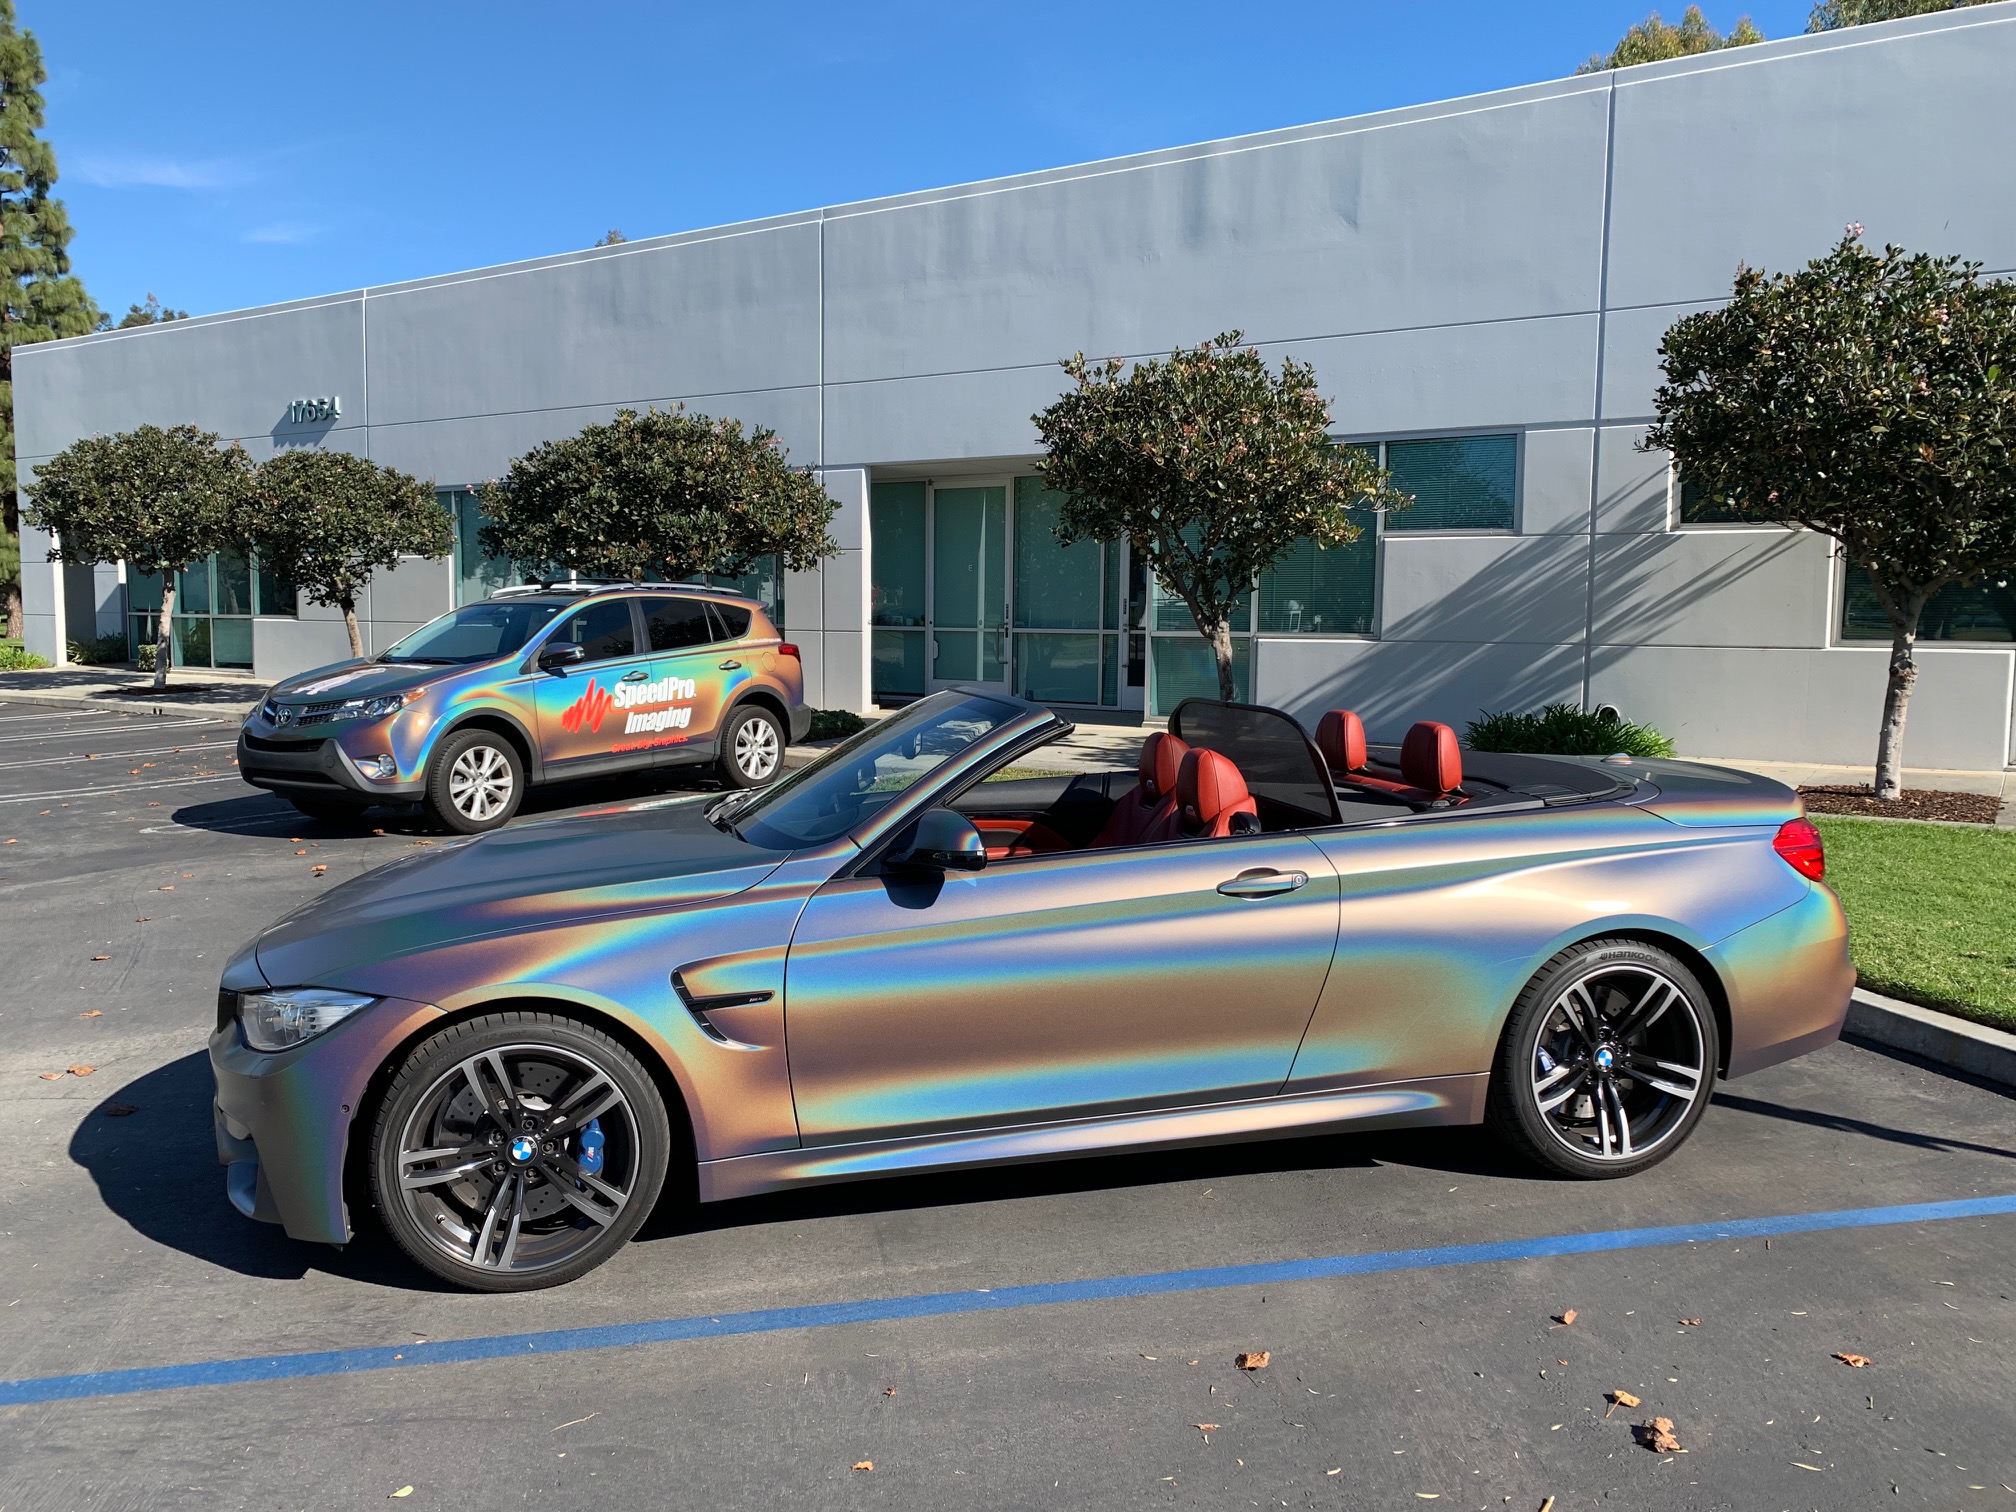 cars with holographic paint in a parking lot